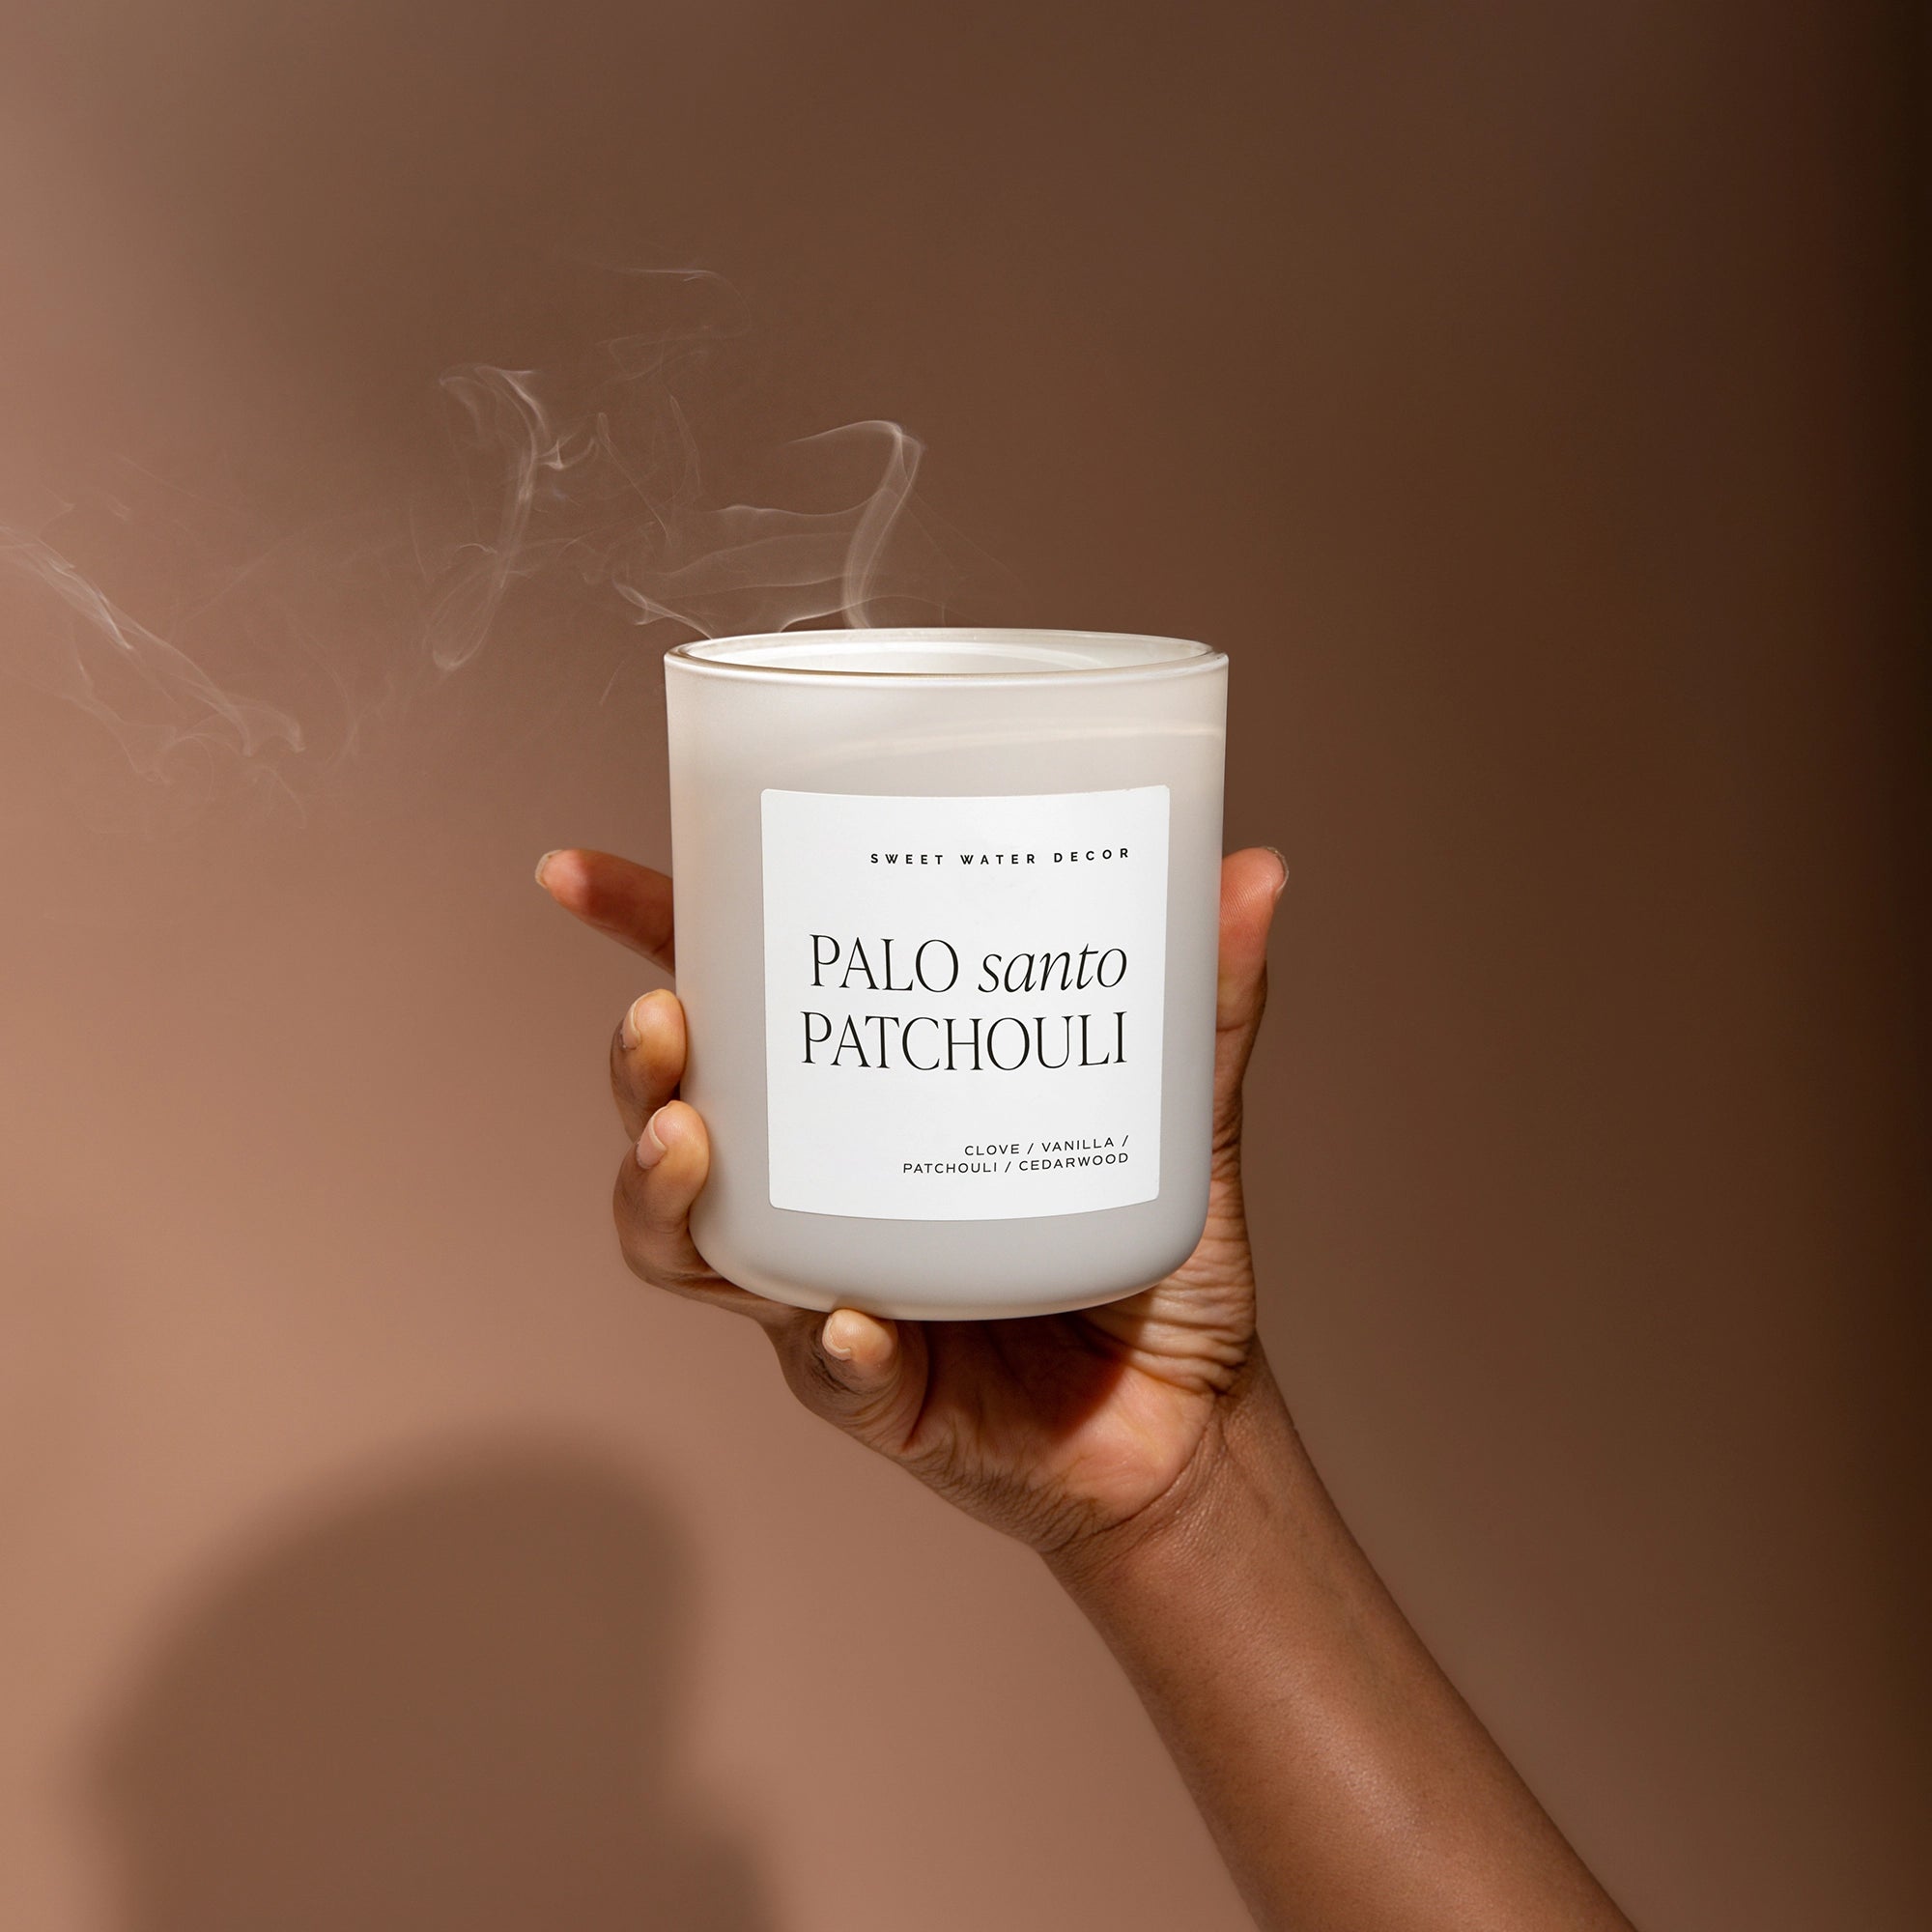 Palo Santo Patchouli soy candle in white matte jar, blown out and held up in one hand.